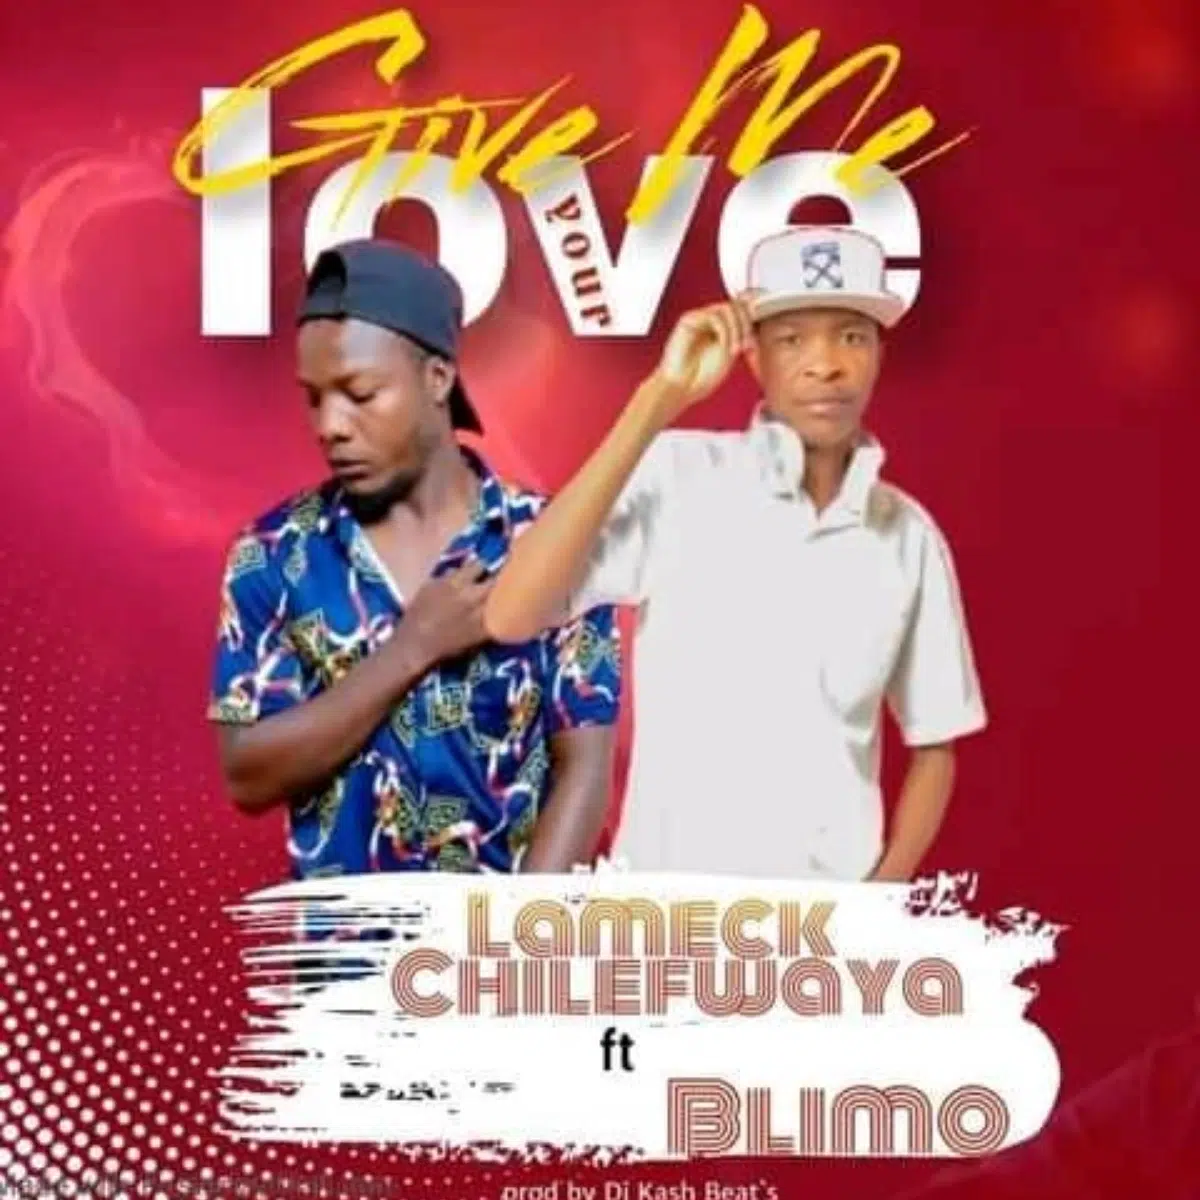 DOWNLOAD: Lameck Chilefwaya Ft Blimo – “Give Me Love” Mp3